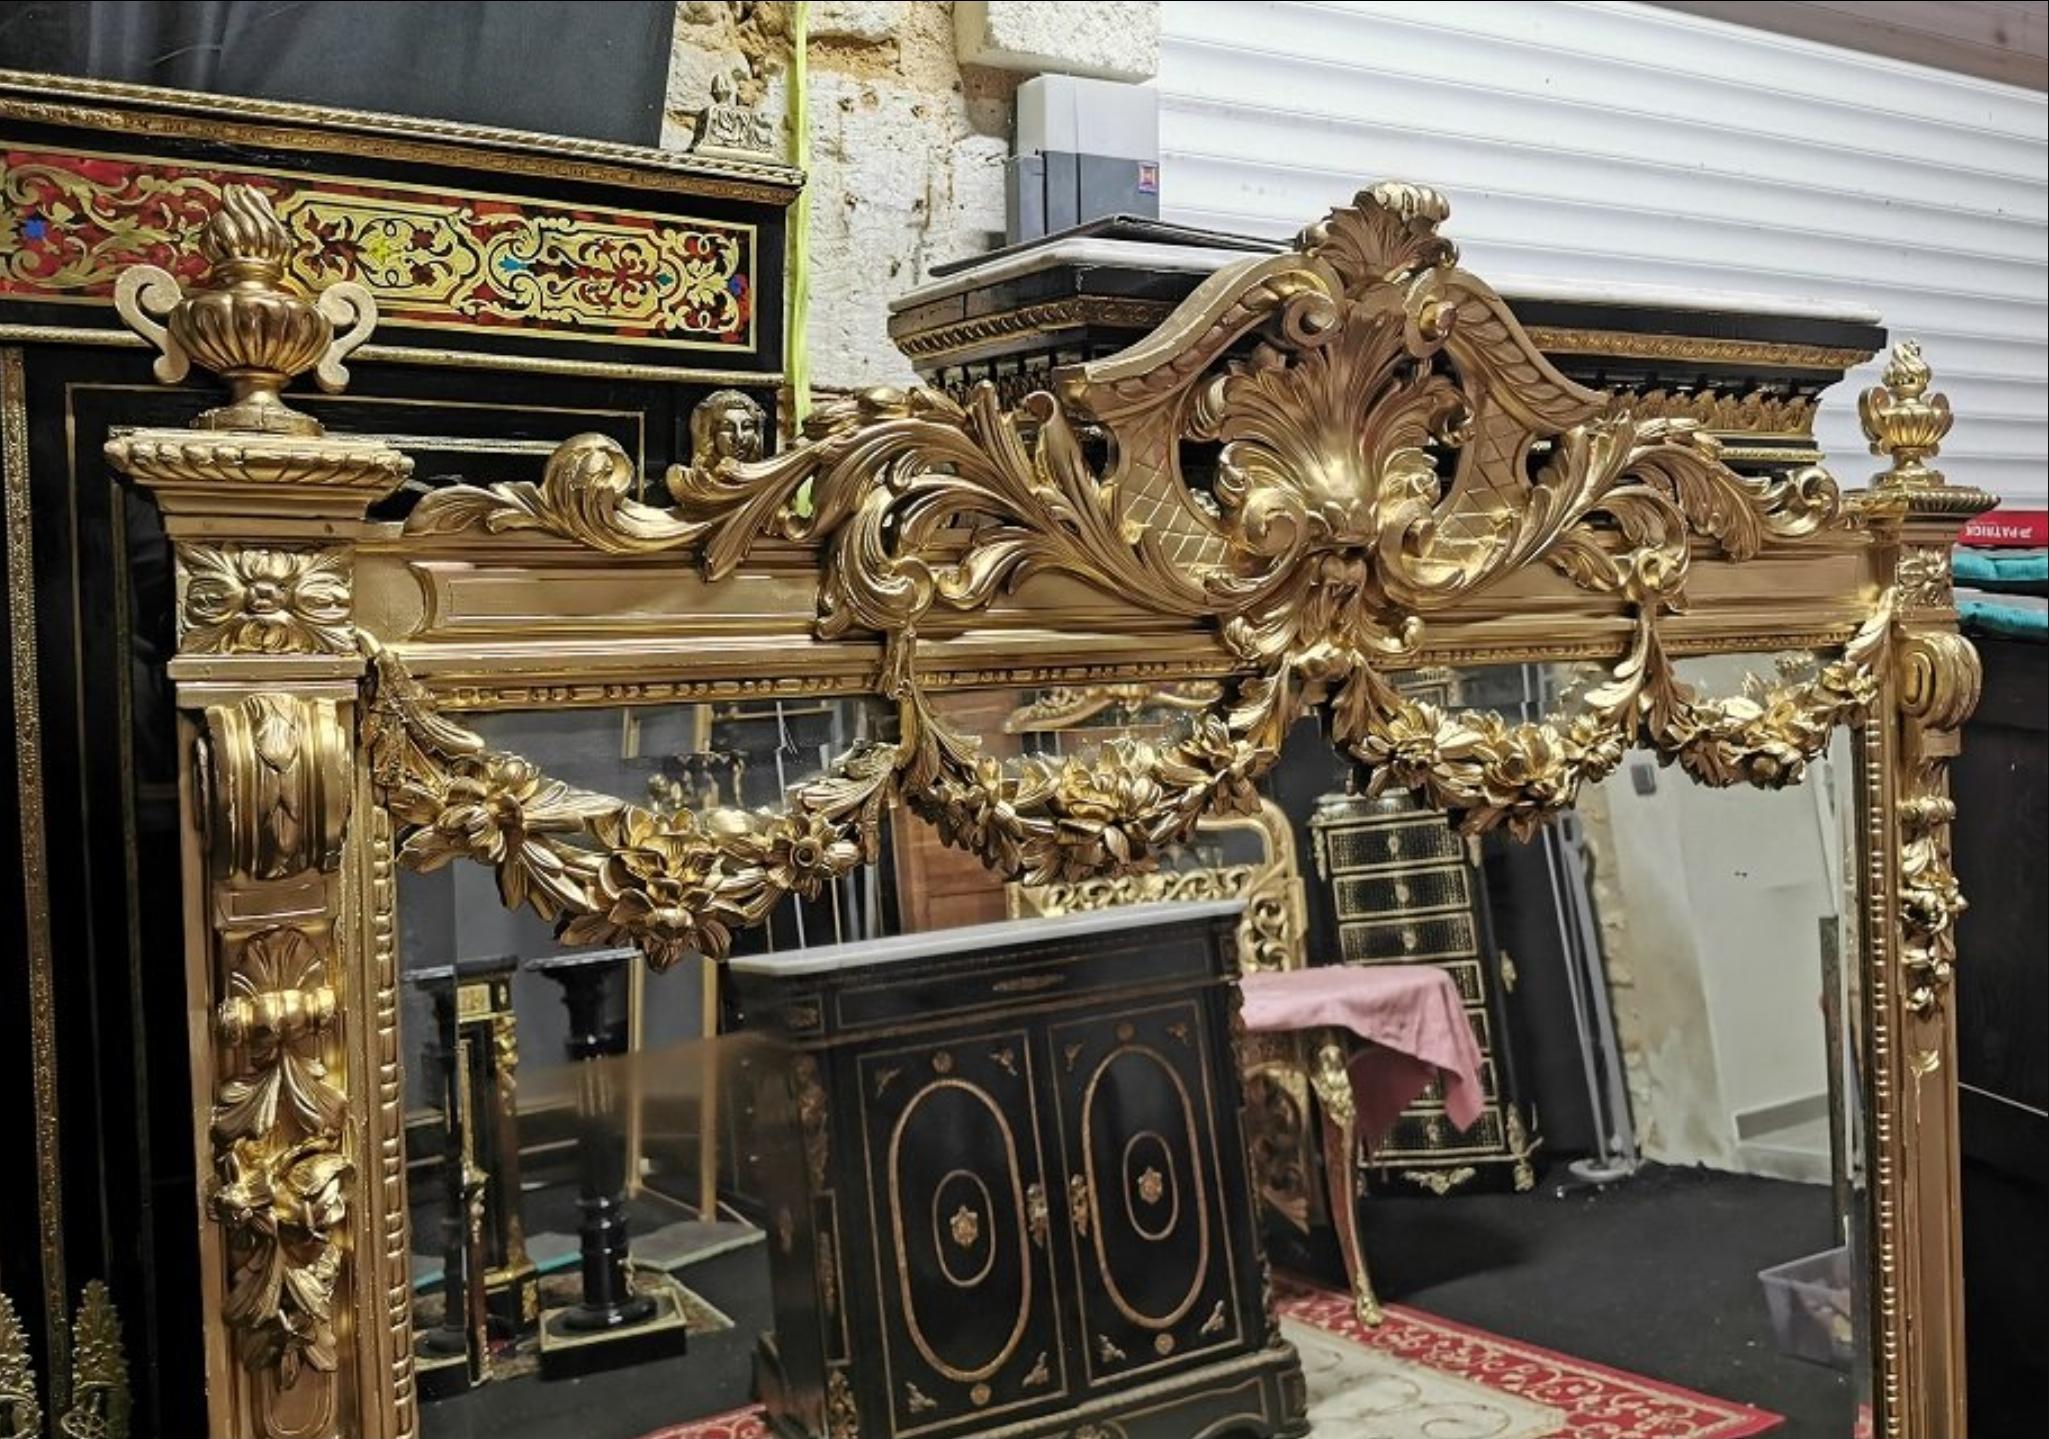 Impressive large dimension Napoleon III mirror, in giltwood and gilt stucco, beautiful details with richly decorations with leaves garlands, scrolls, ribbons and scraps. Gorgeous and Rare shape.
France, 19th century, circa 1865, in a very good